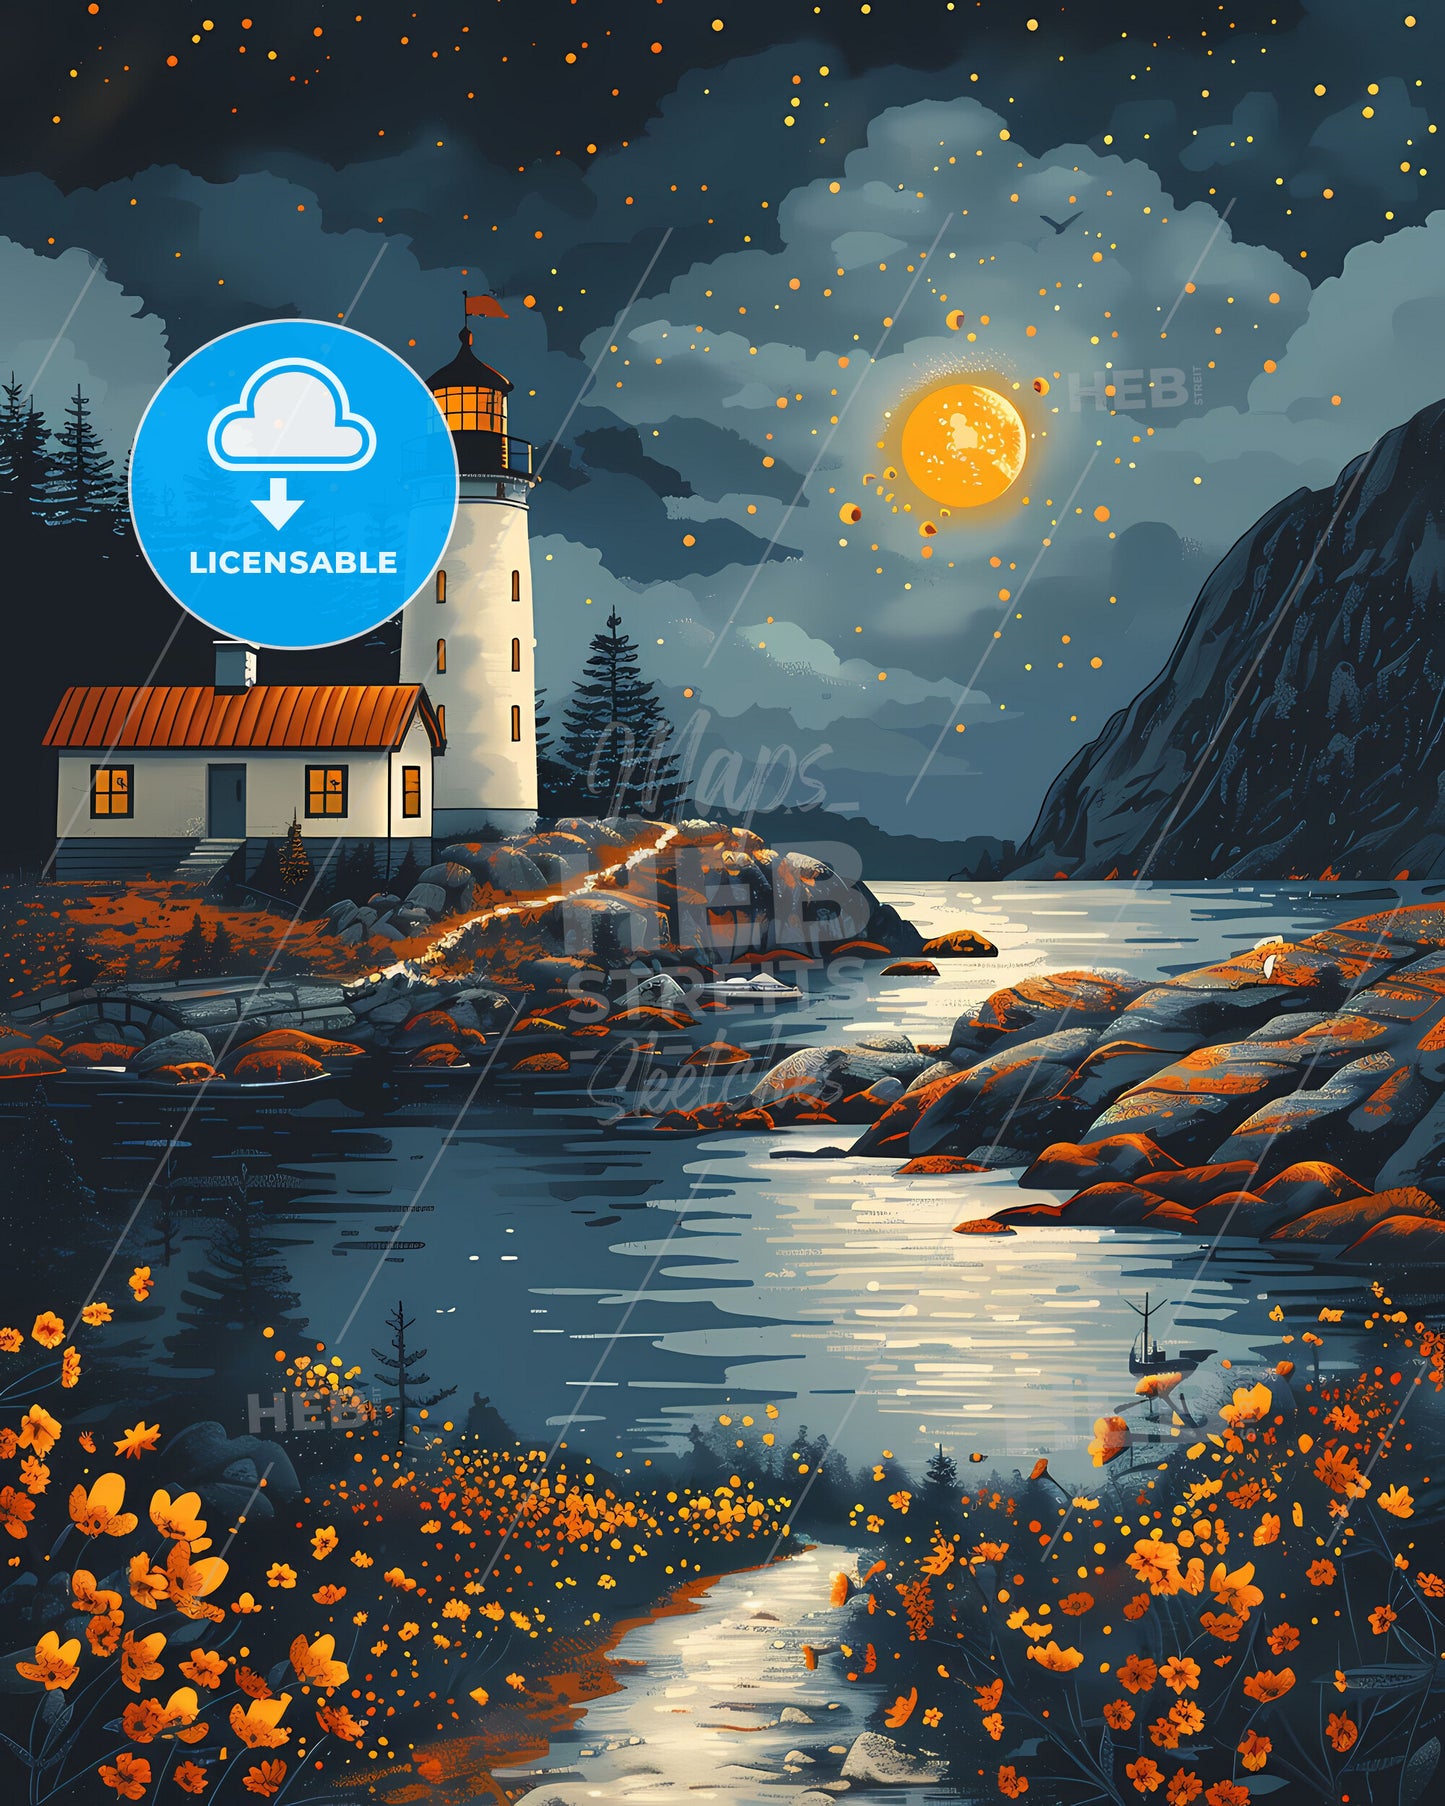 Vibrant Painting of Swedish Lighthouse by River, Depicting European Scenery, Art Focus